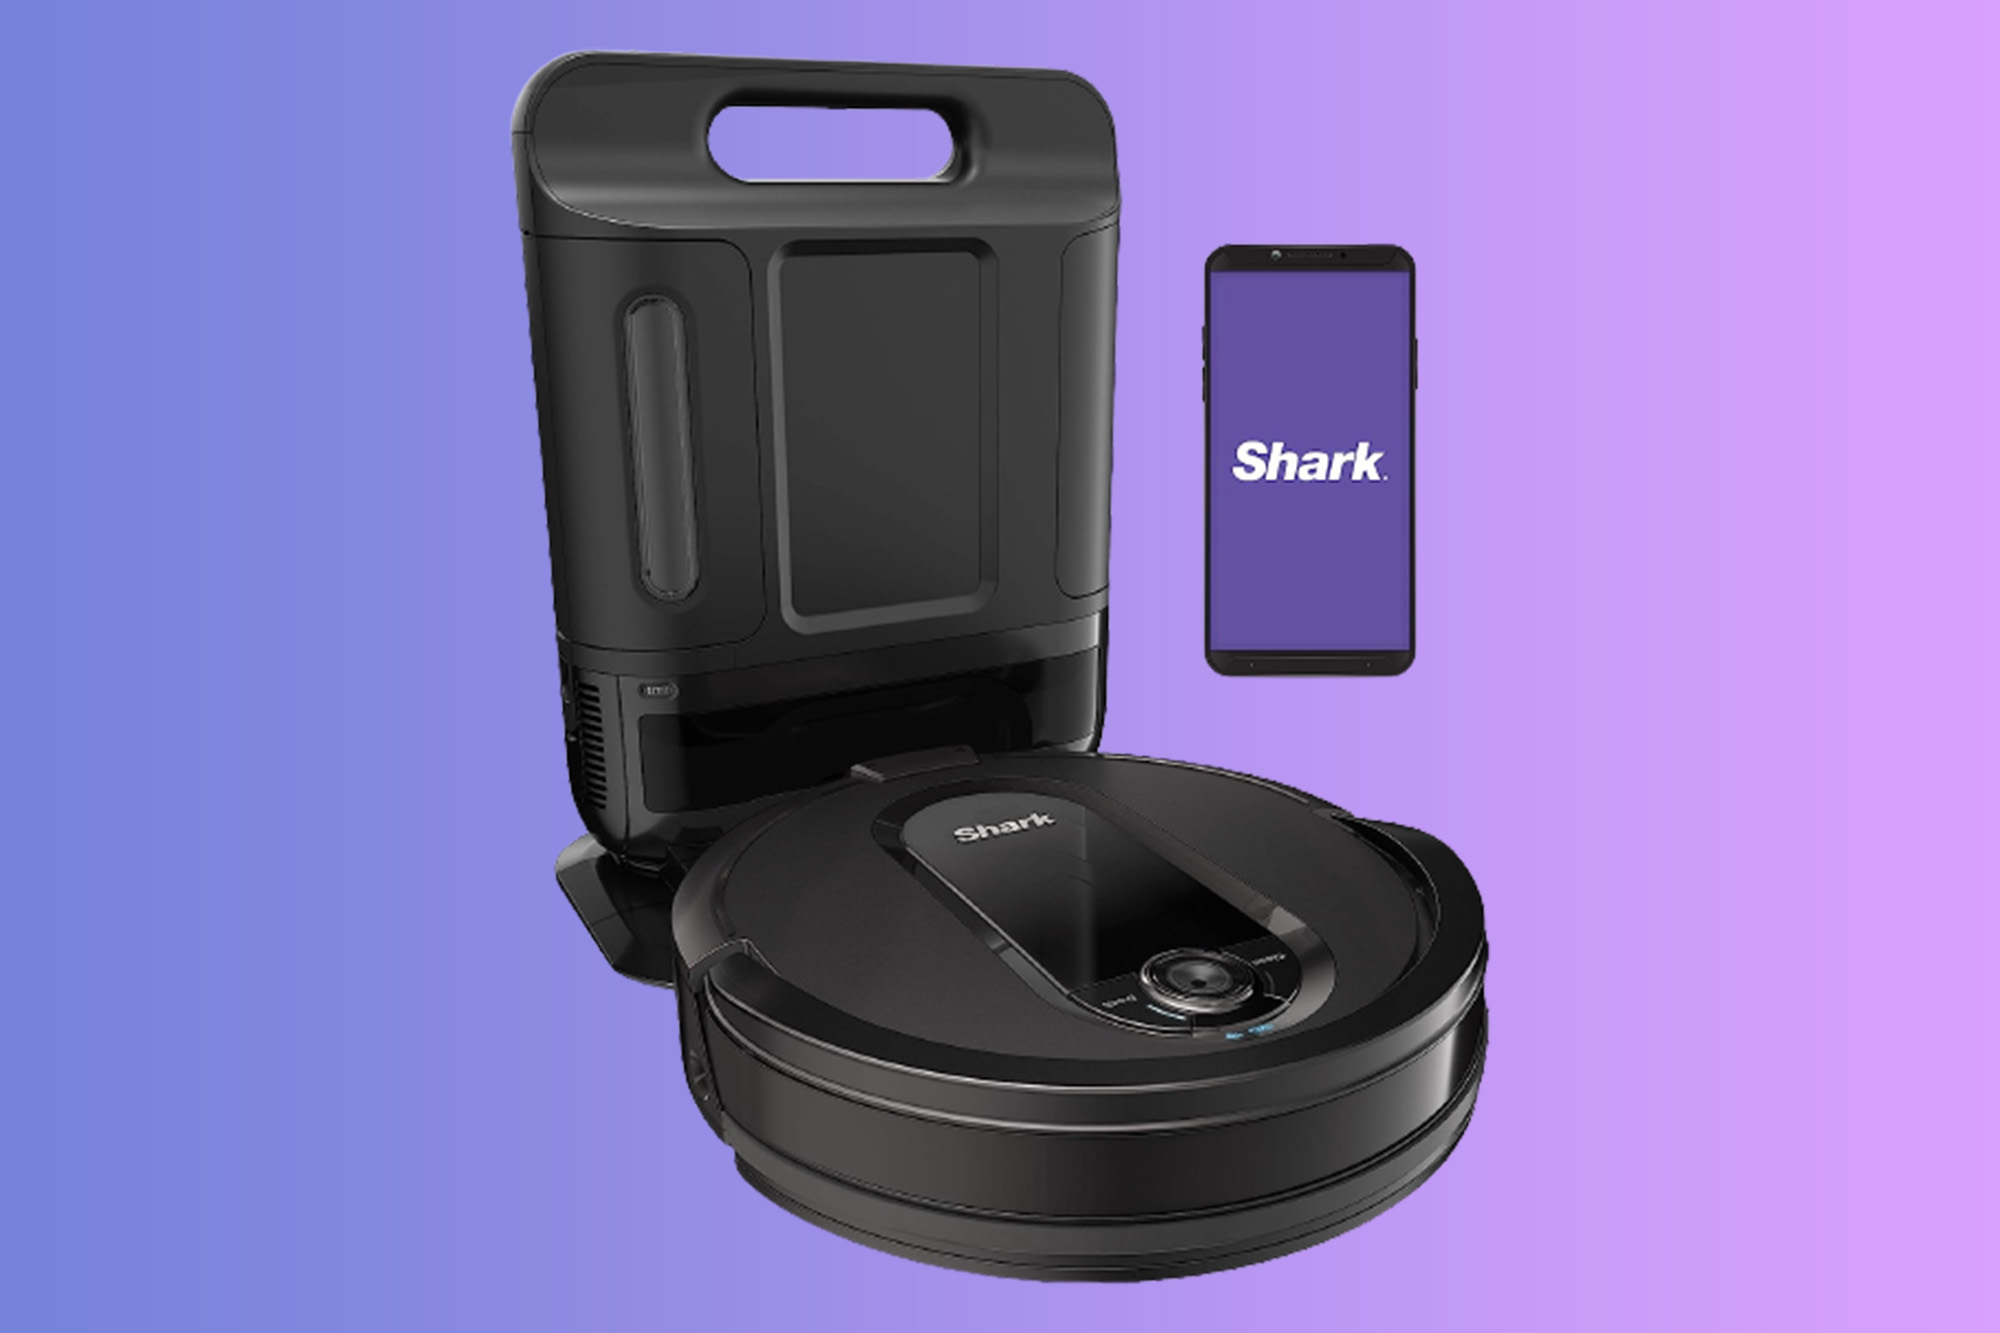 Save up to 45% on Shark vacuums with this Amazon deal